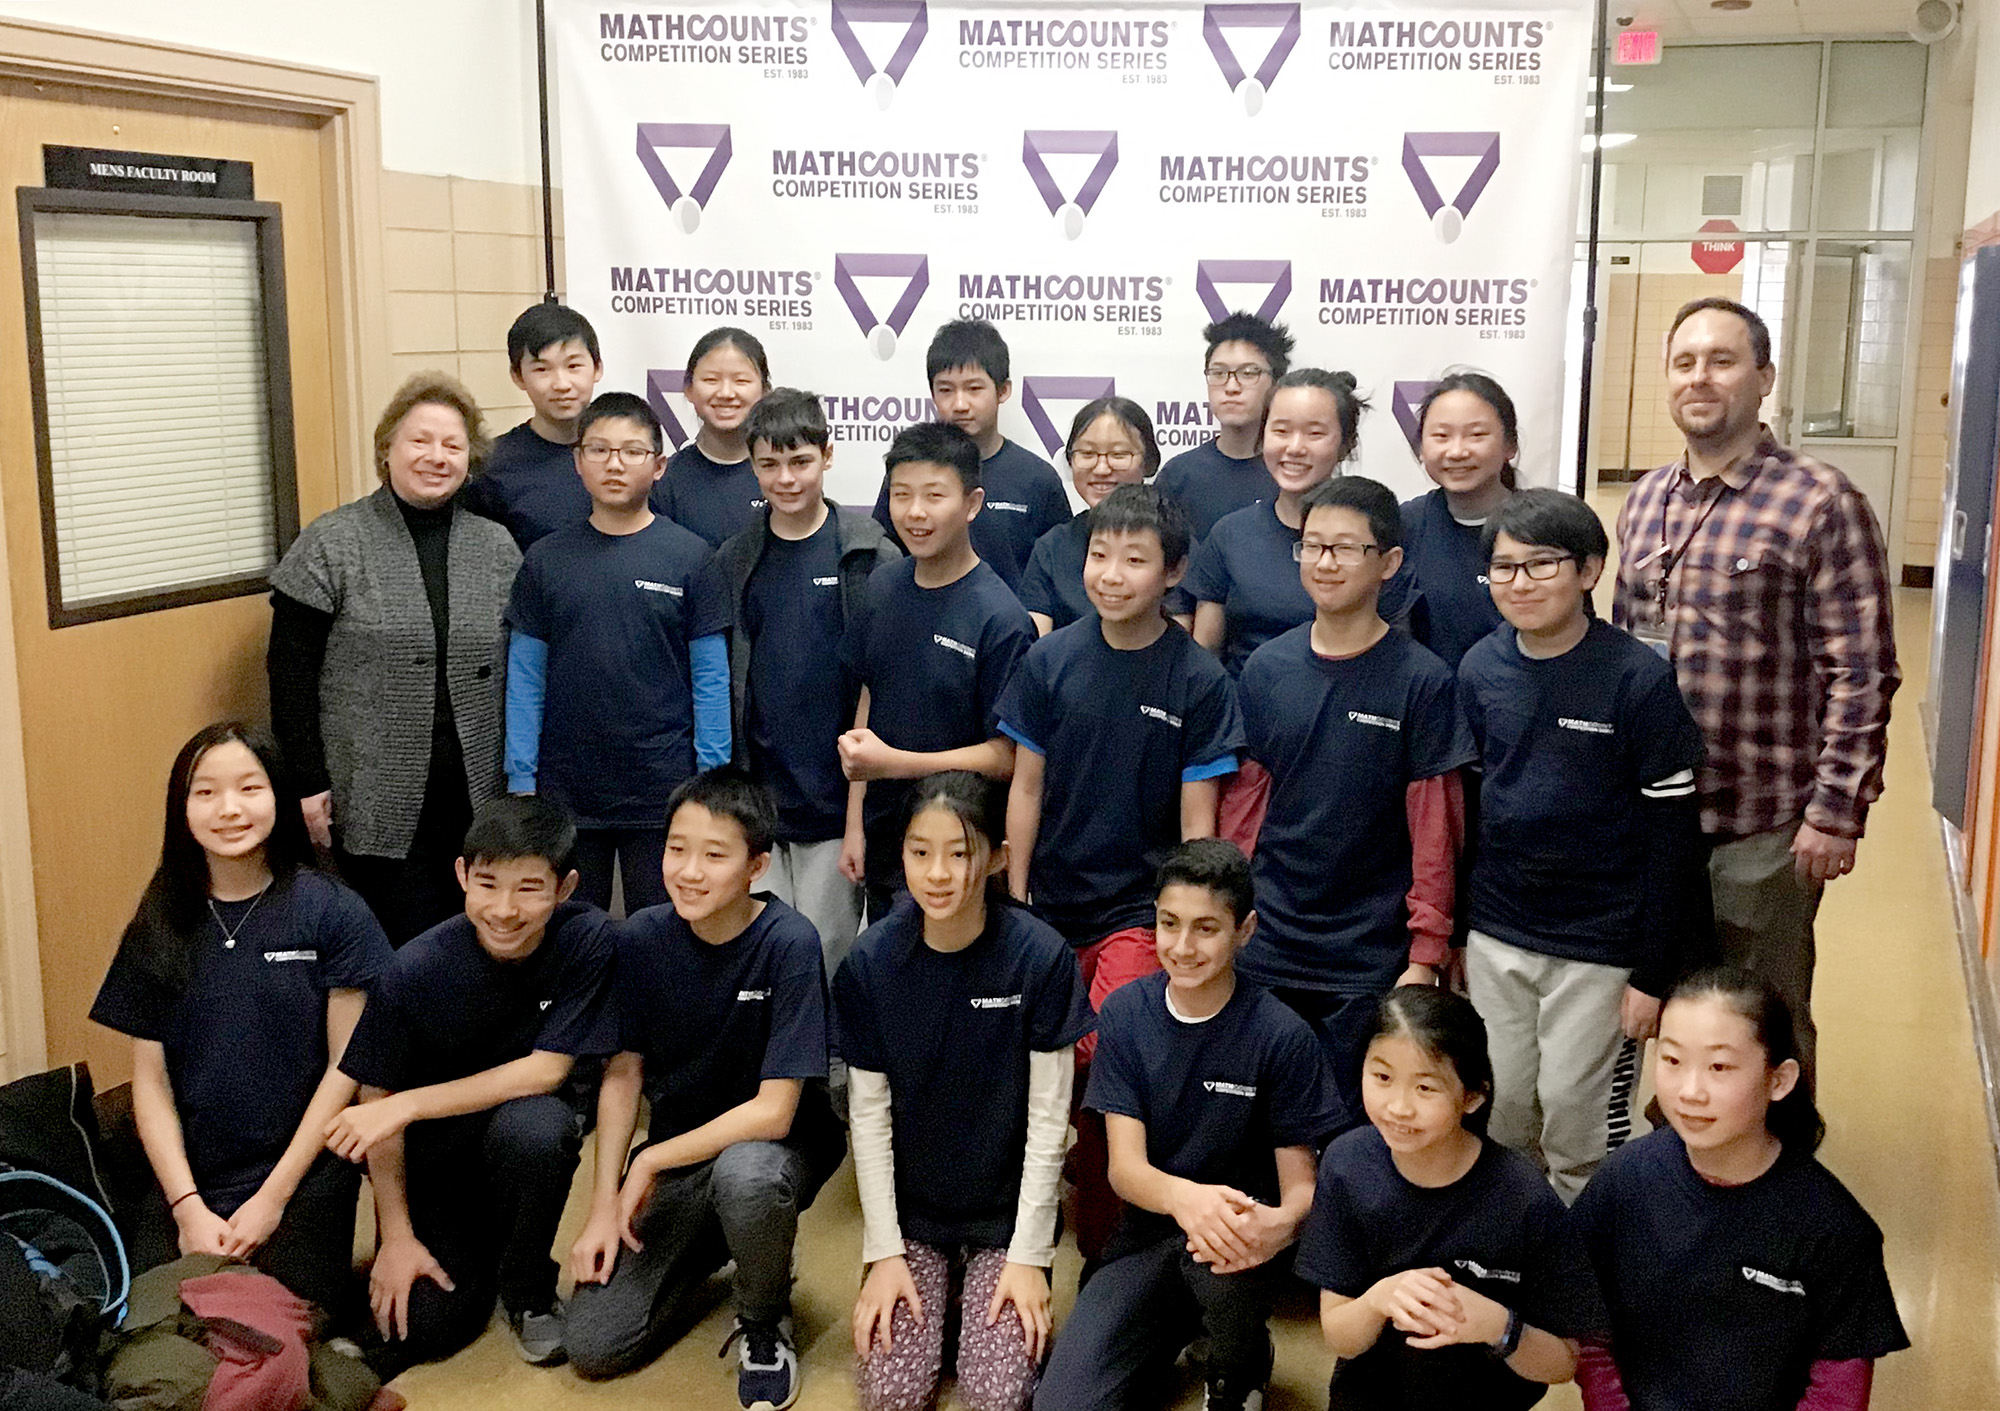 Math teams from North Middle and South Middle at the MATHCOUNTS competition at North Middle School on Feb. 2. (Photo courtesy of the Great Neck Public Schools)